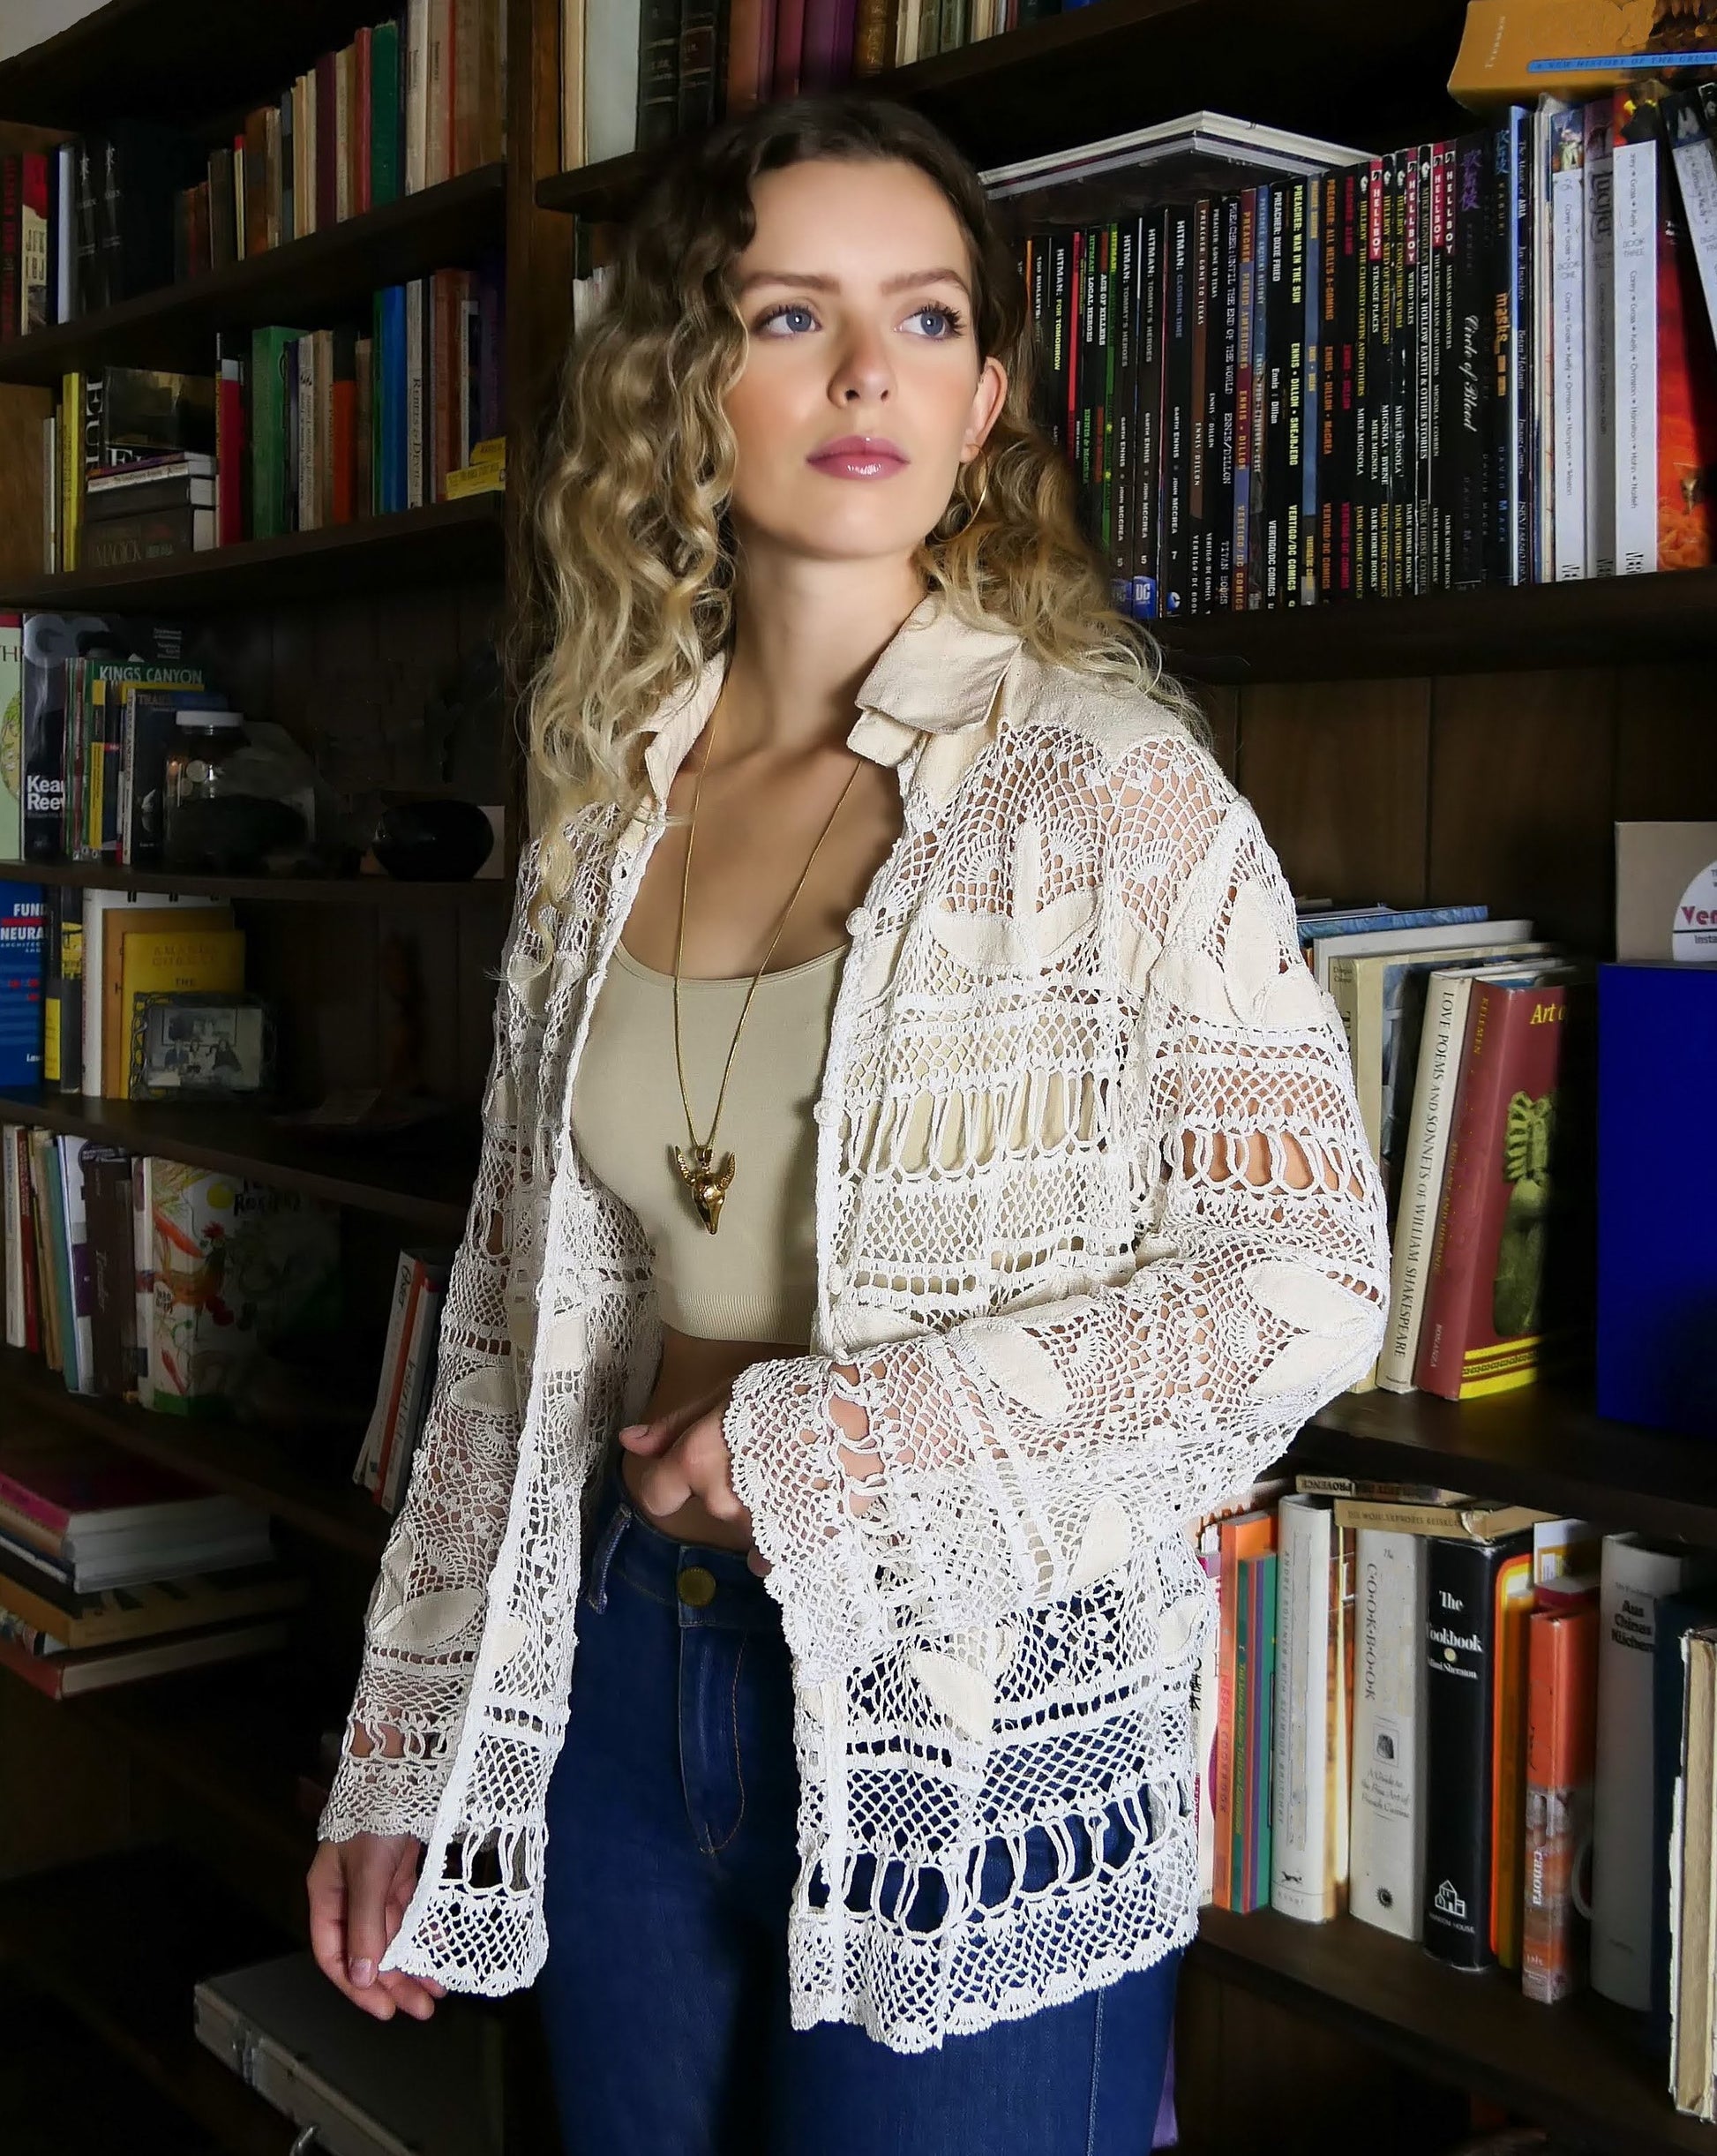 The perfect beach coverup top for your next getaway. An oversized hand crocheted button down top embellished with raw silk leaf-like cutouts. Looks great with a bralette and jeans, or a pair of white wide leg cotton pants, a straw hat, and flip flops.